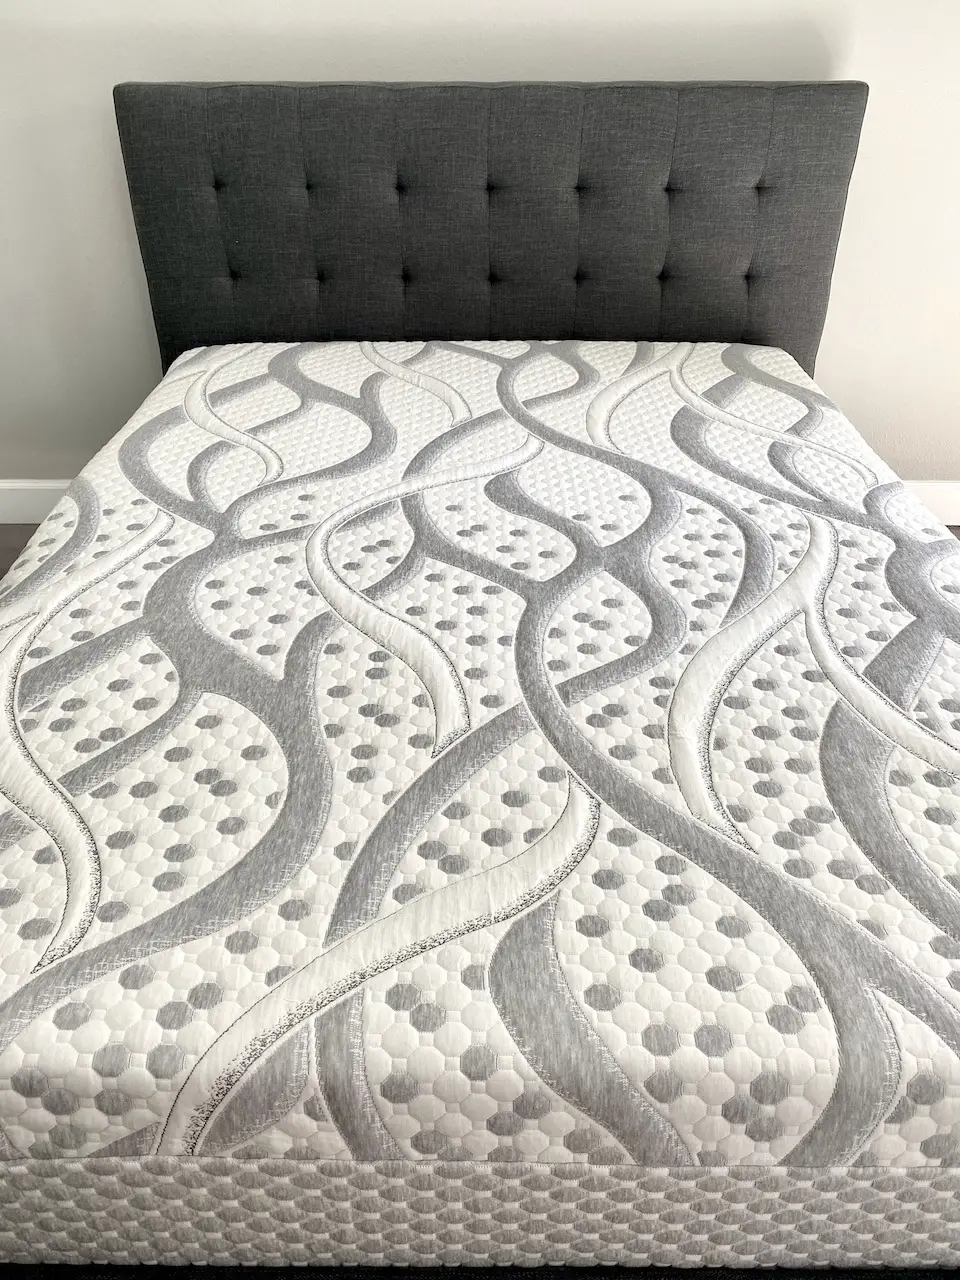 CRaVE Mattress layer of memory foam and pocketed coils